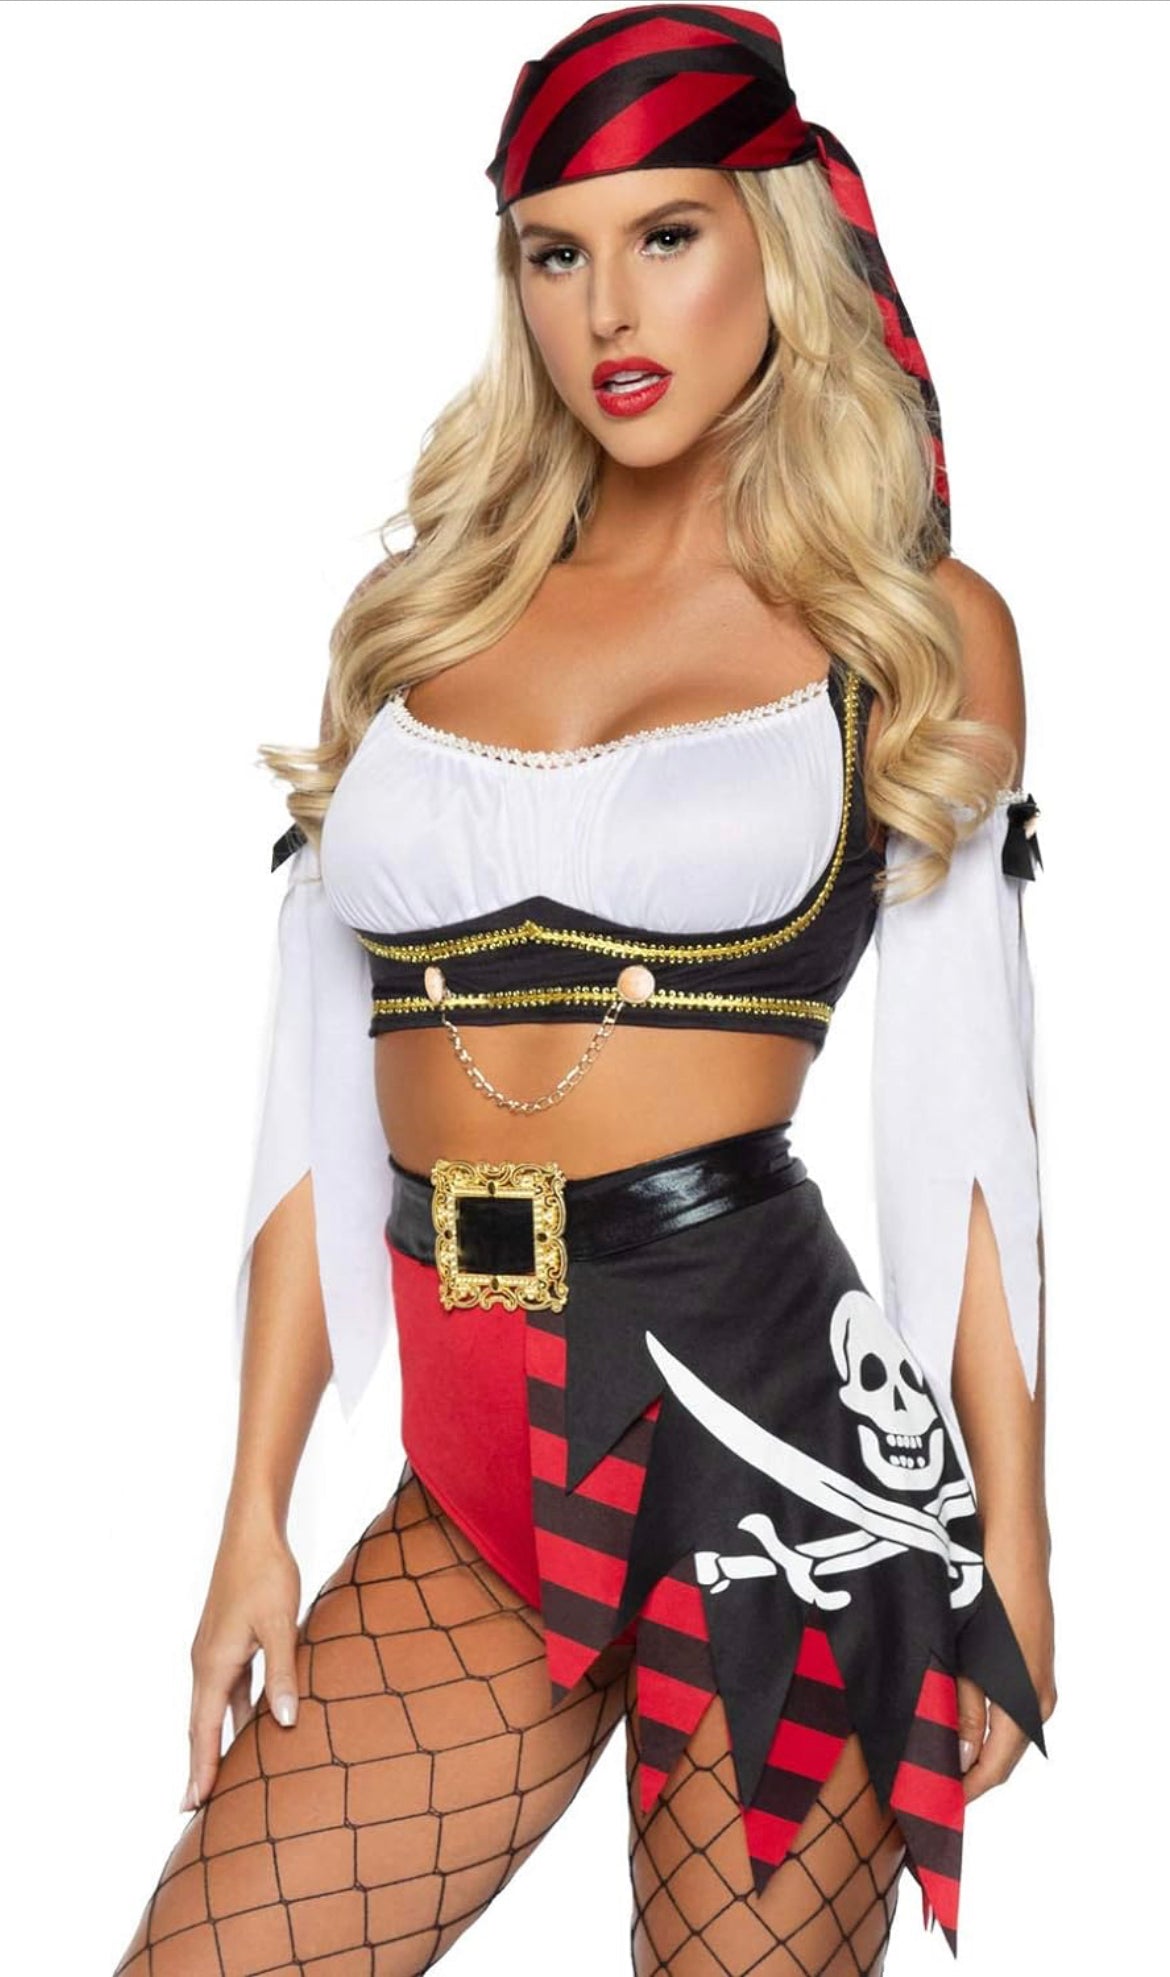 Wicked Pirate Wench Costume